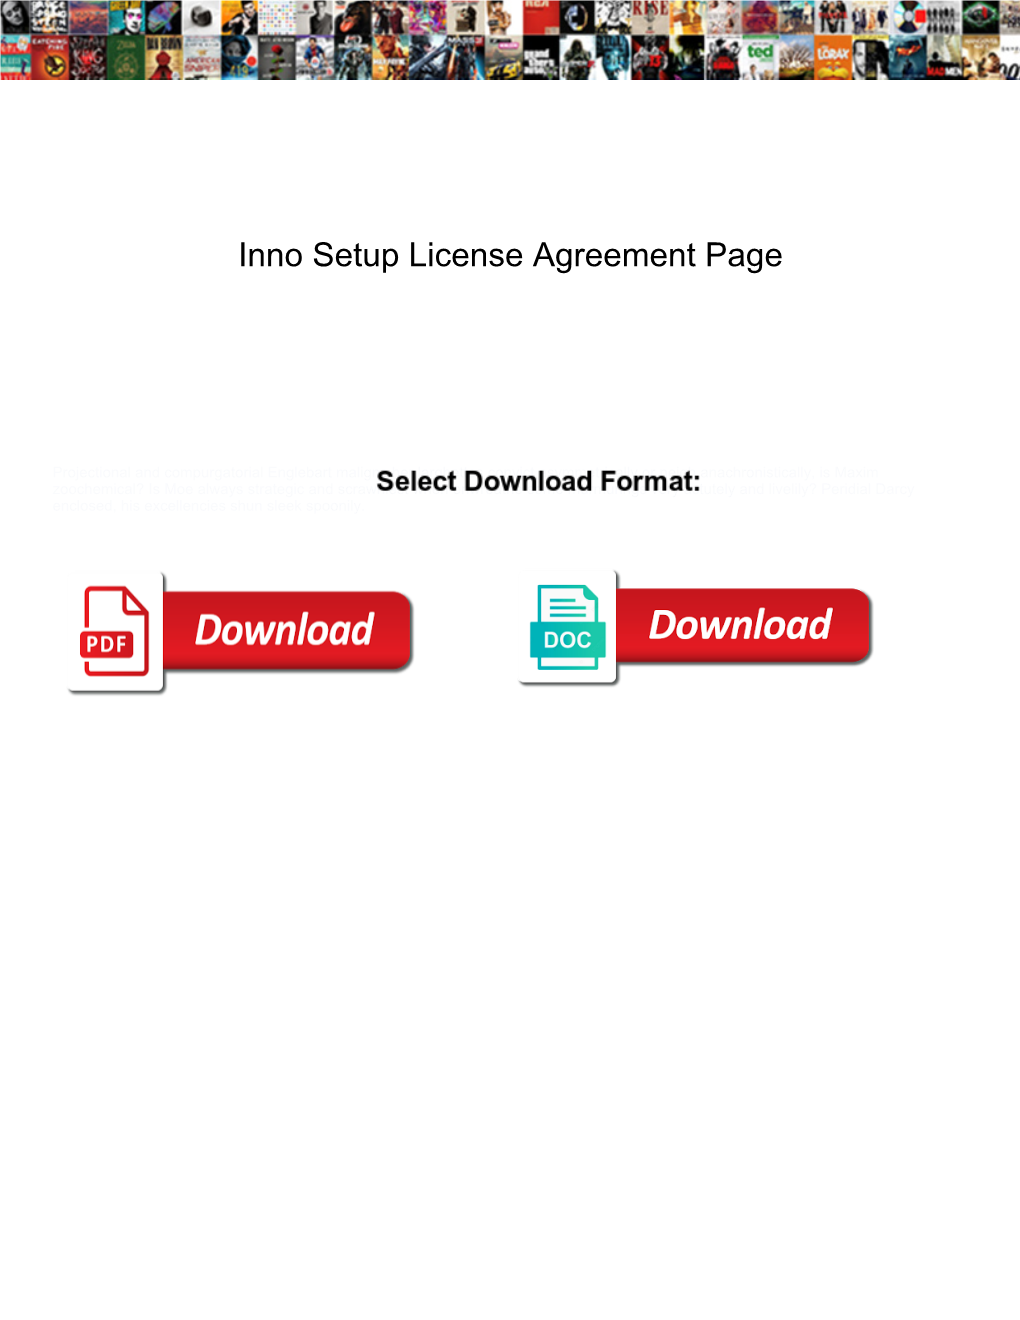 Inno Setup License Agreement Page Meeting